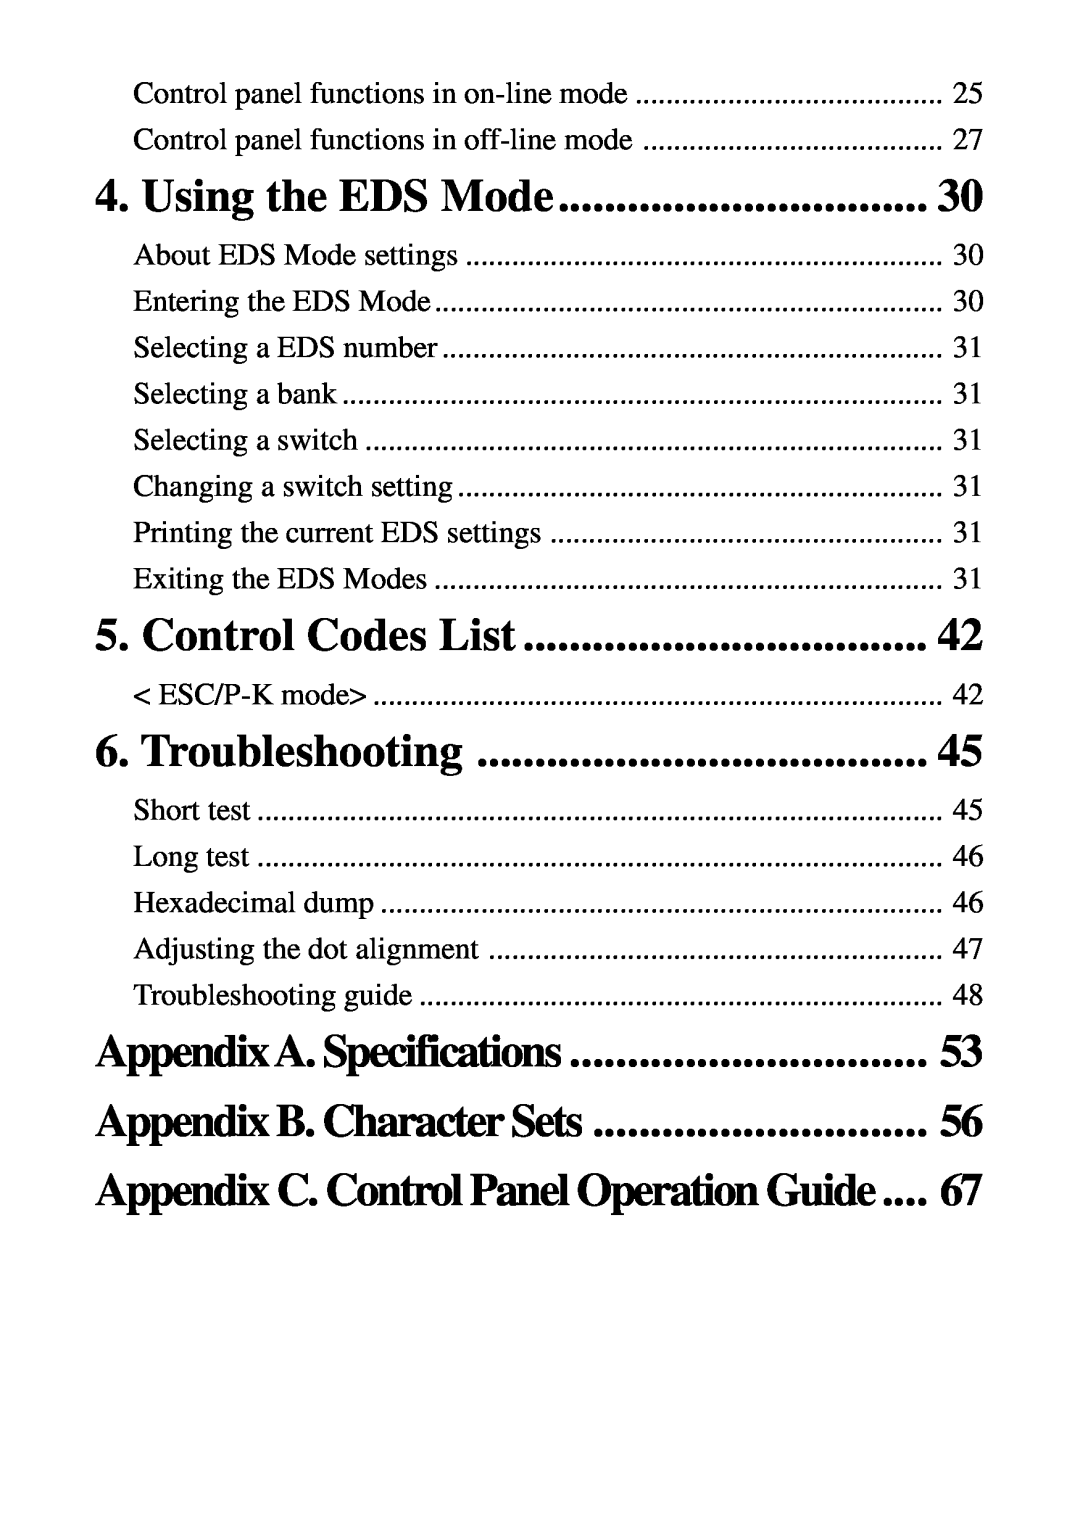 Star Micronics LC-500 user manual Using the EDS Mode, Control Codes List, Troubleshooting, Appendix A. Specifications 